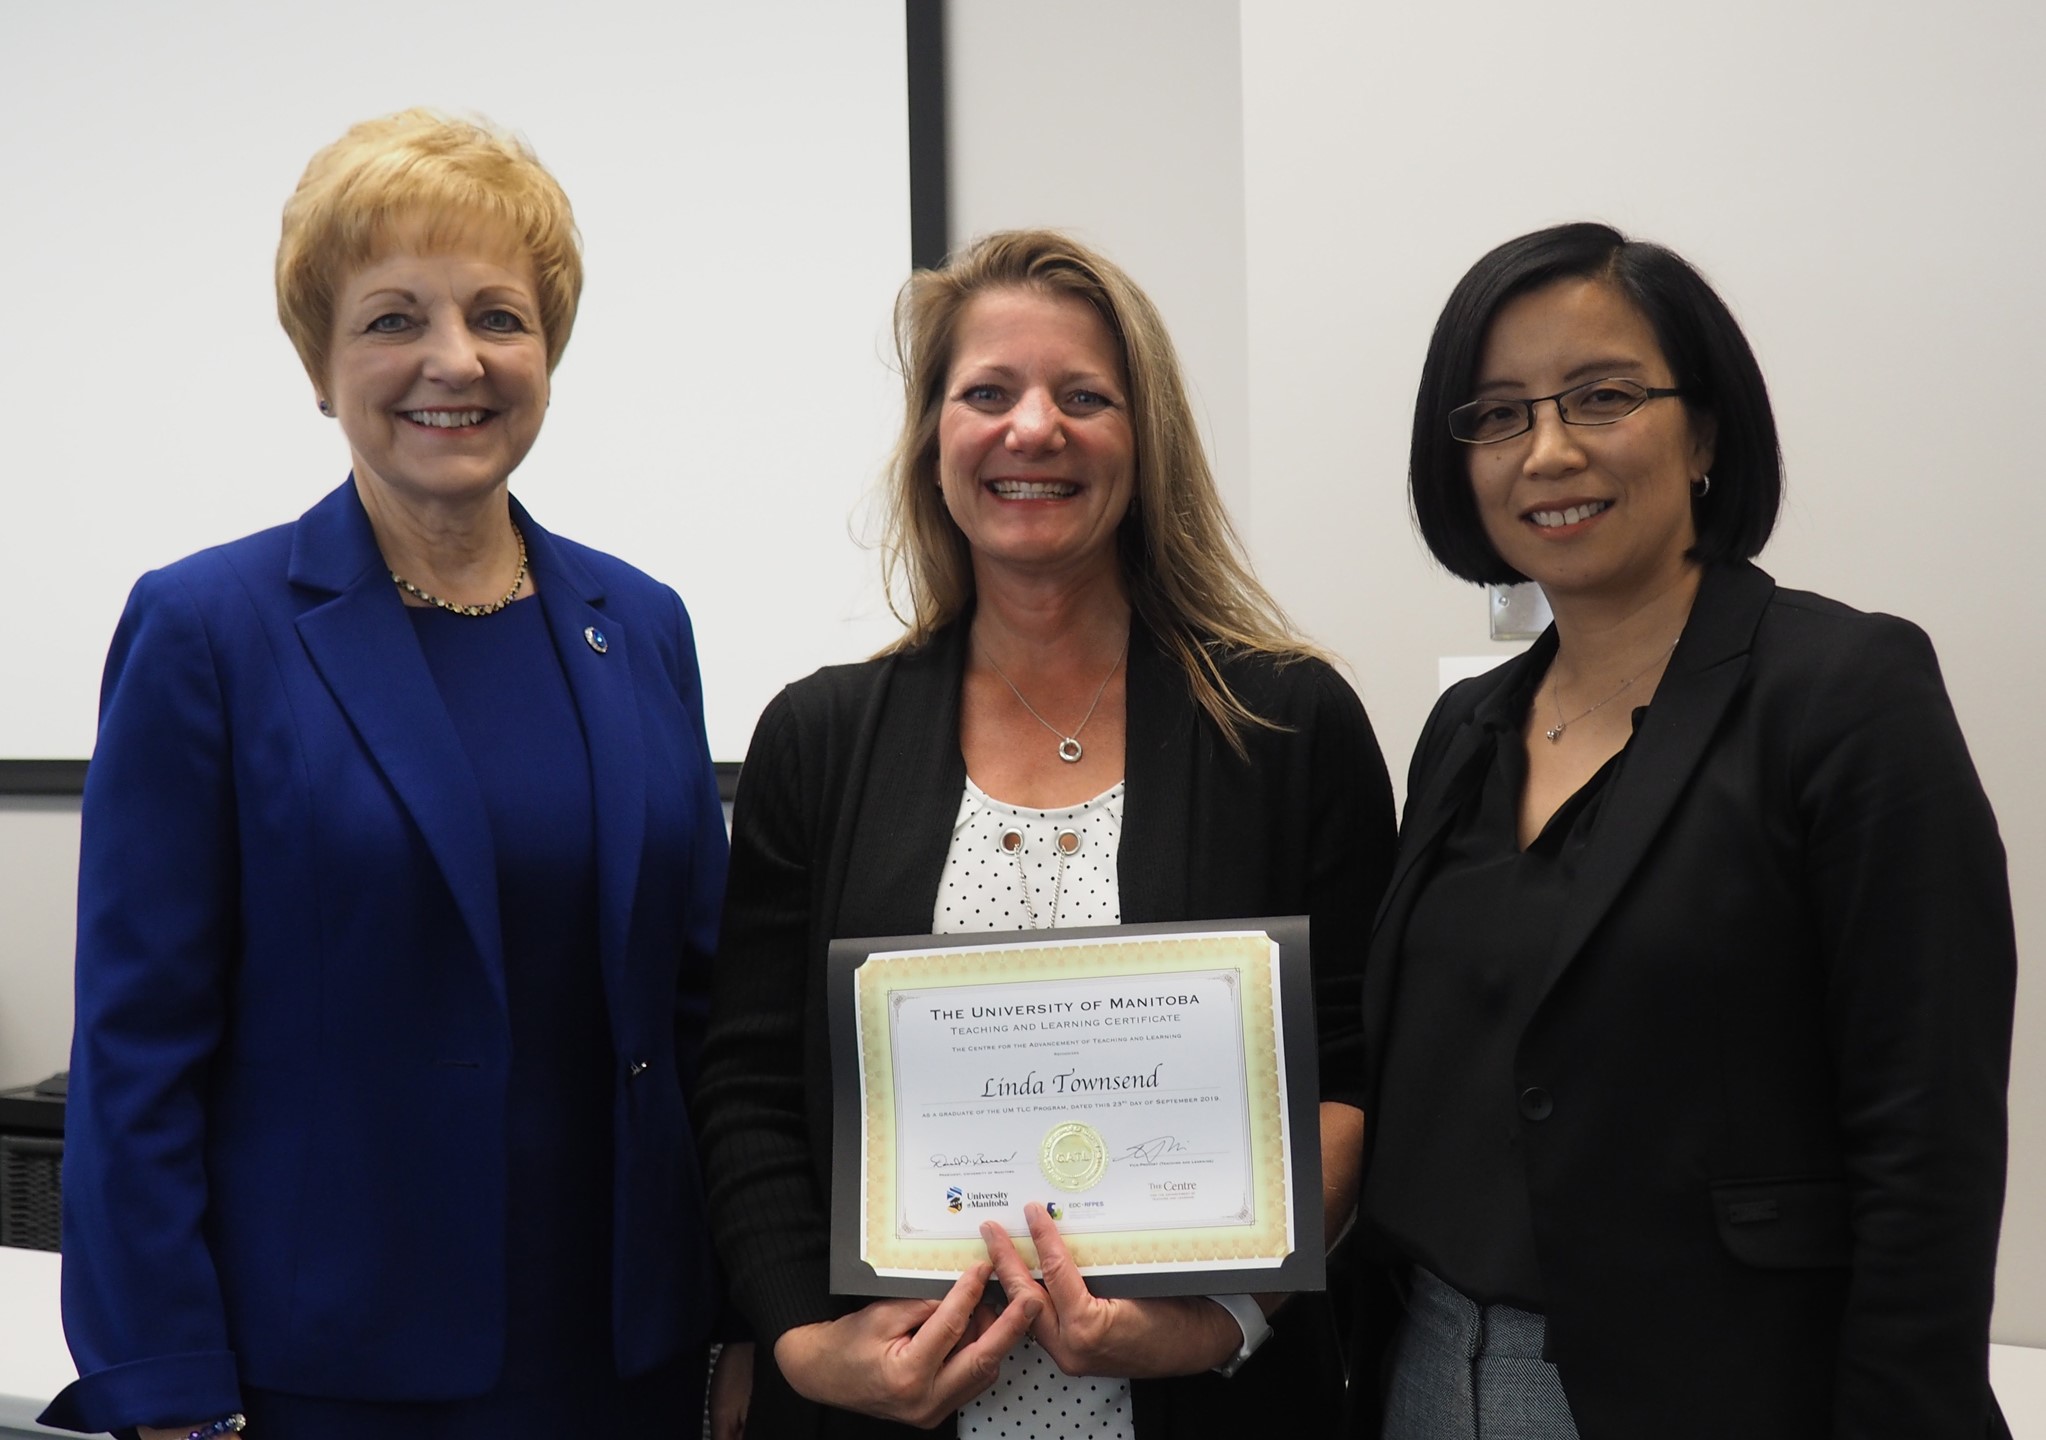 (L-R) Netha Dyck, Dean, College of Nursing; Linda Townsend, Rady Faculty of Health Sciences: College of Nursing; Erica Jung, Associate Director, The Centre